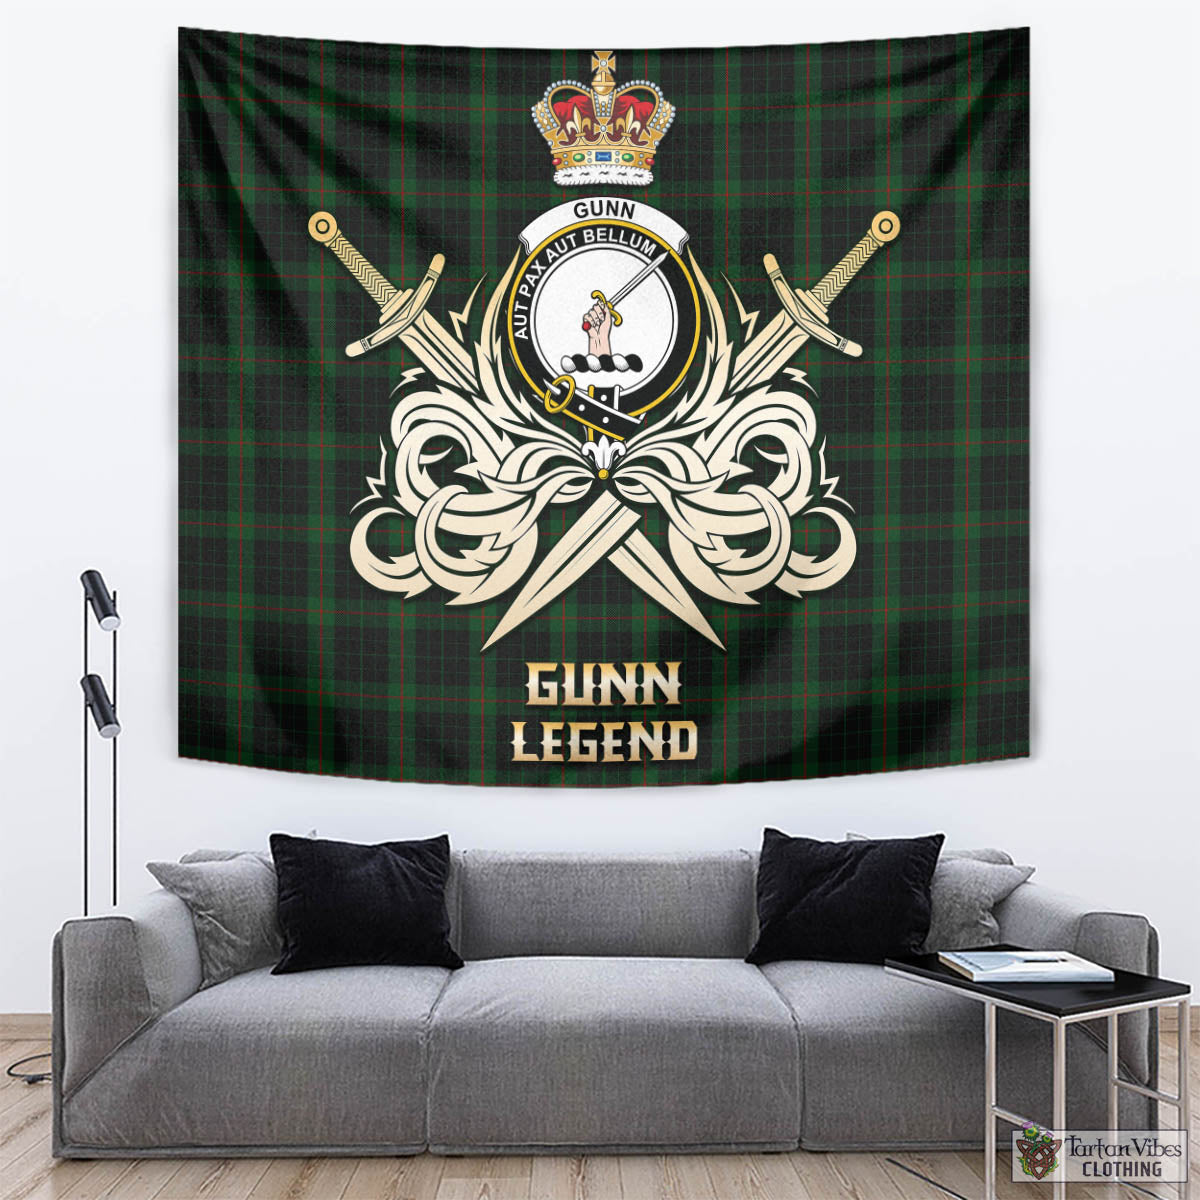 Tartan Vibes Clothing Gunn Logan Tartan Tapestry with Clan Crest and the Golden Sword of Courageous Legacy